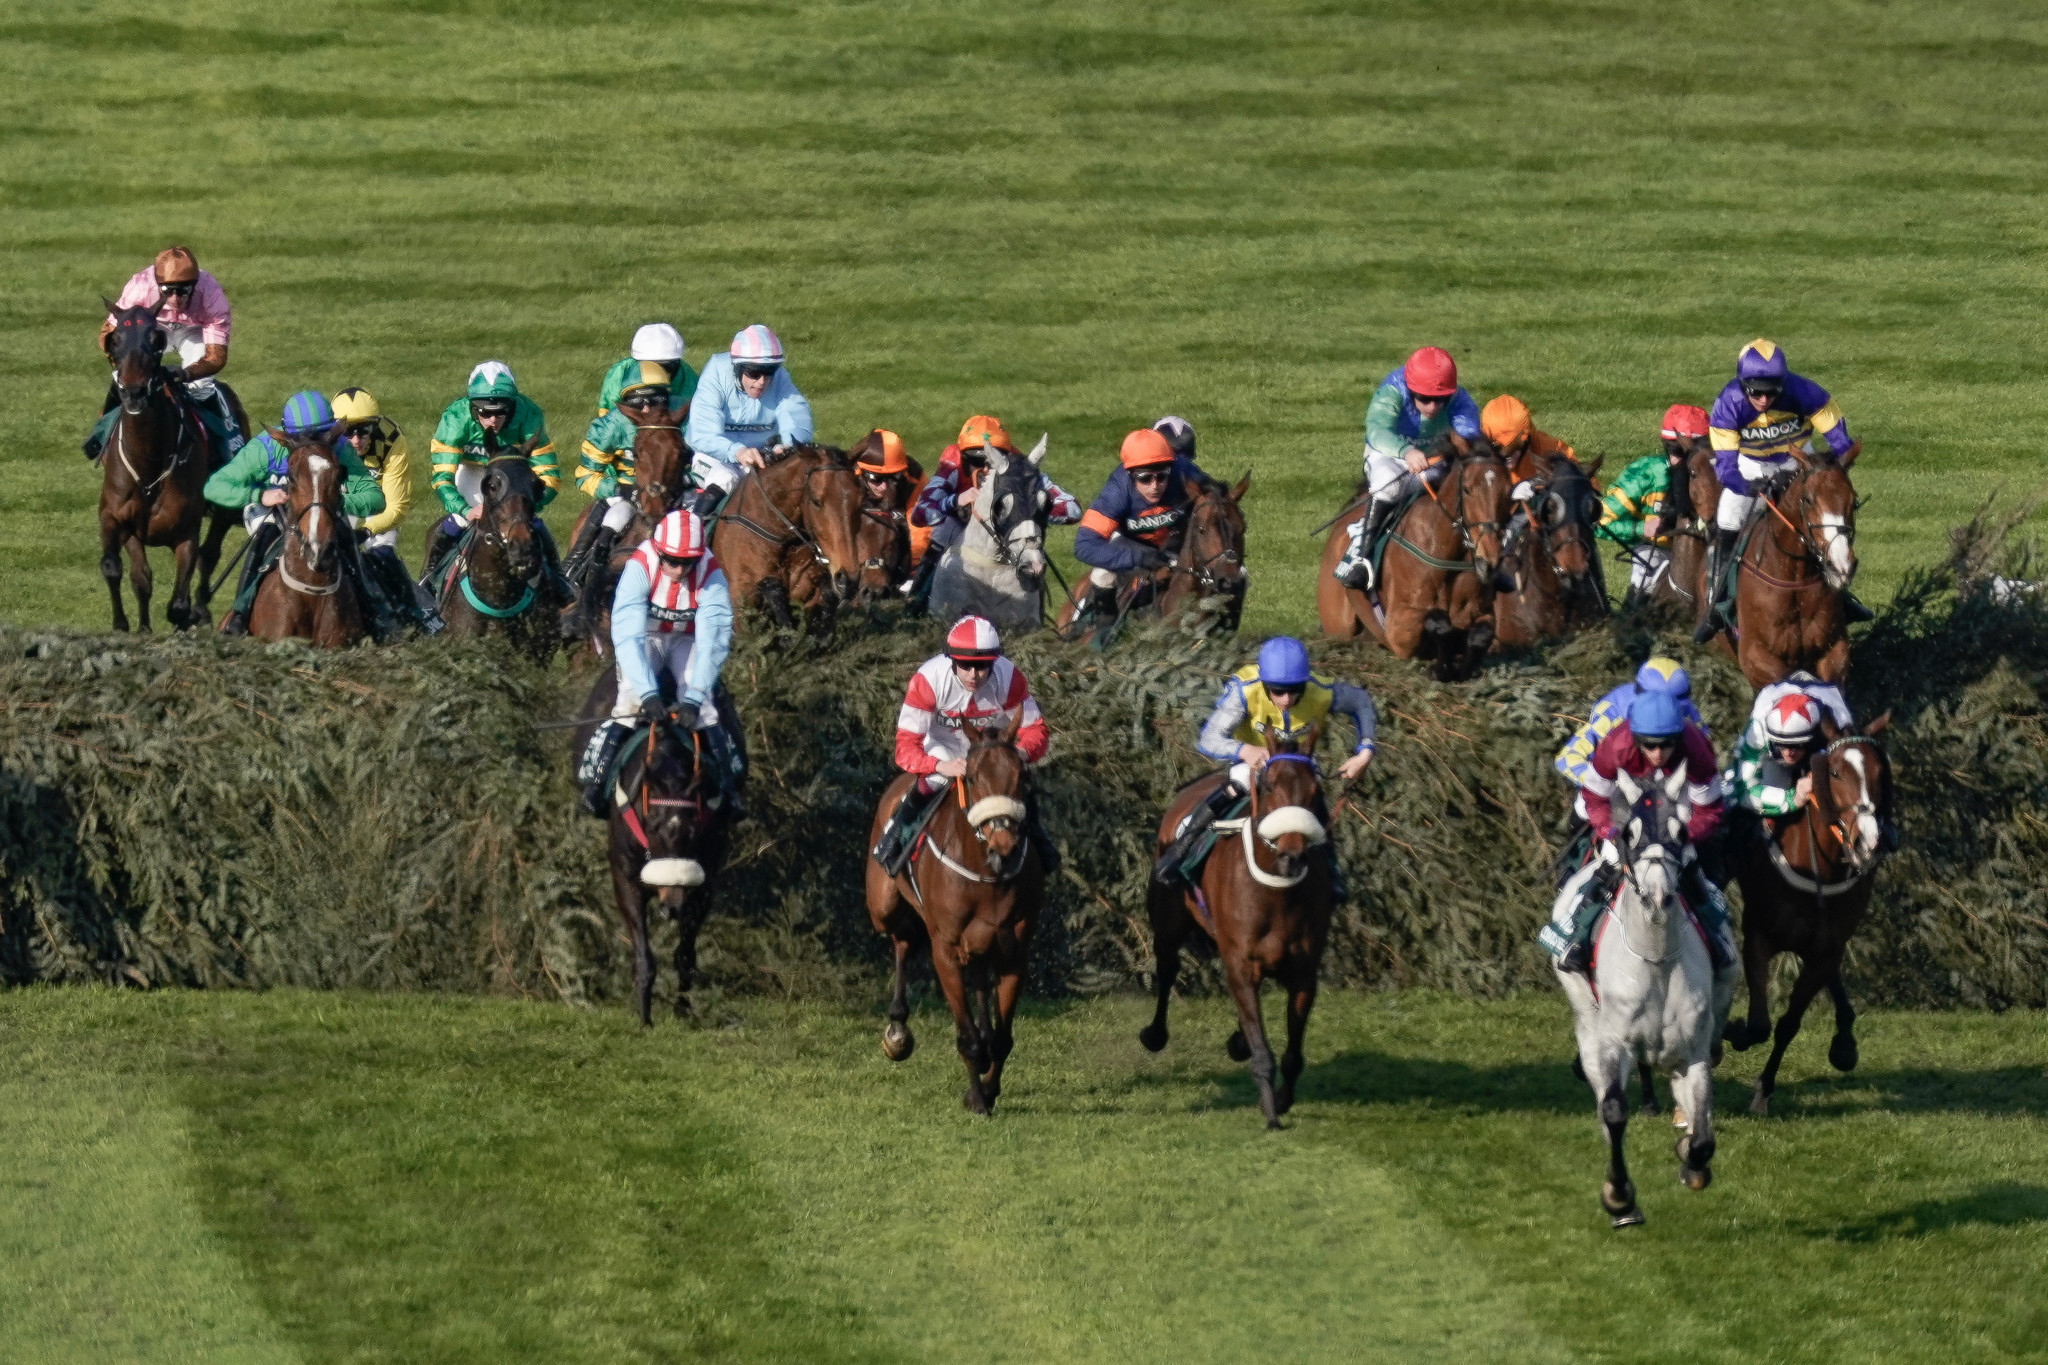 The Grand National retains its special place on Britain's sporting calendar ©Getty Images